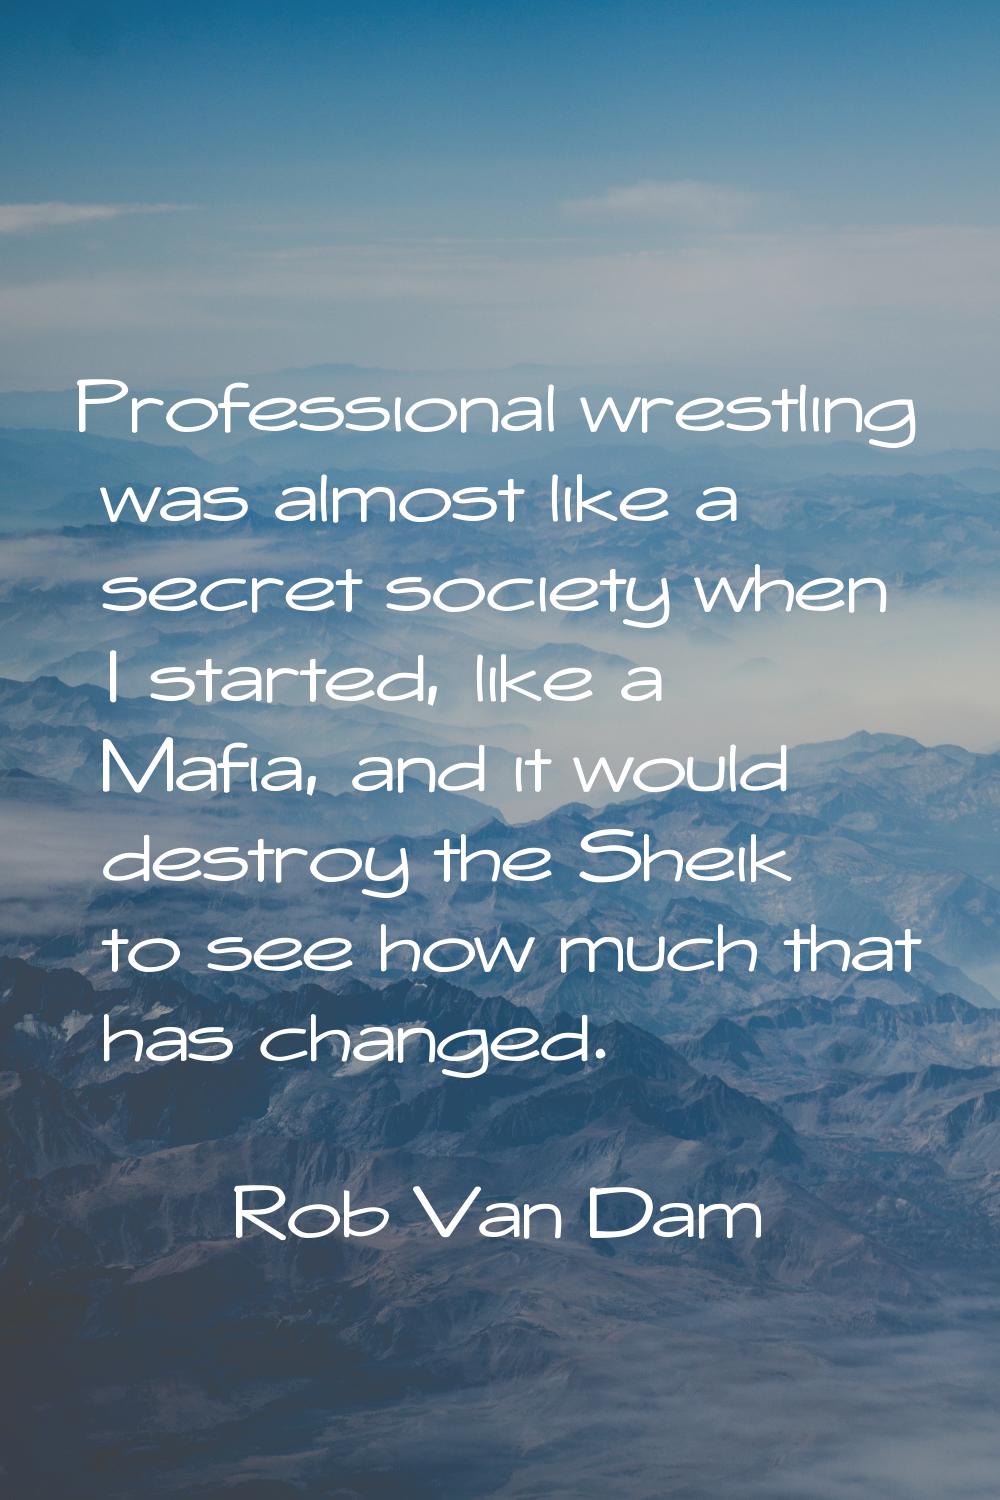 Professional wrestling was almost like a secret society when I started, like a Mafia, and it would 